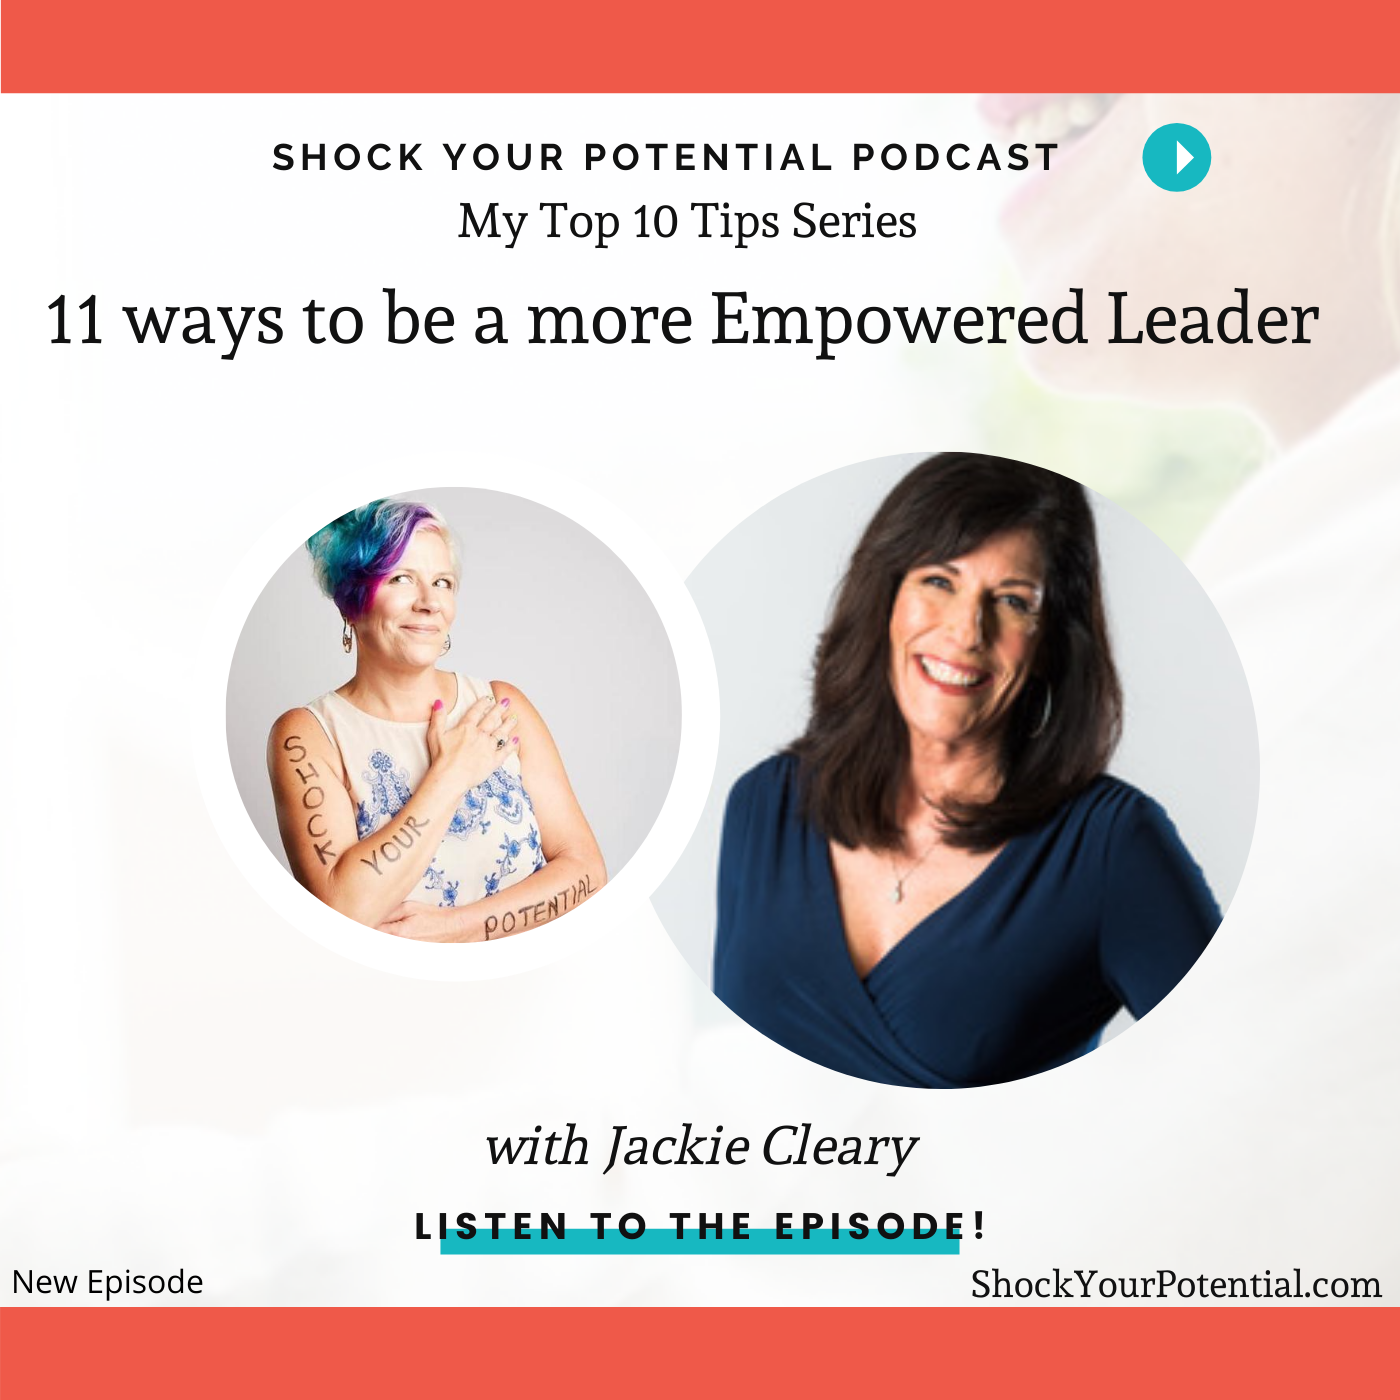 Shock Your Potential Jackie Cleary Interview